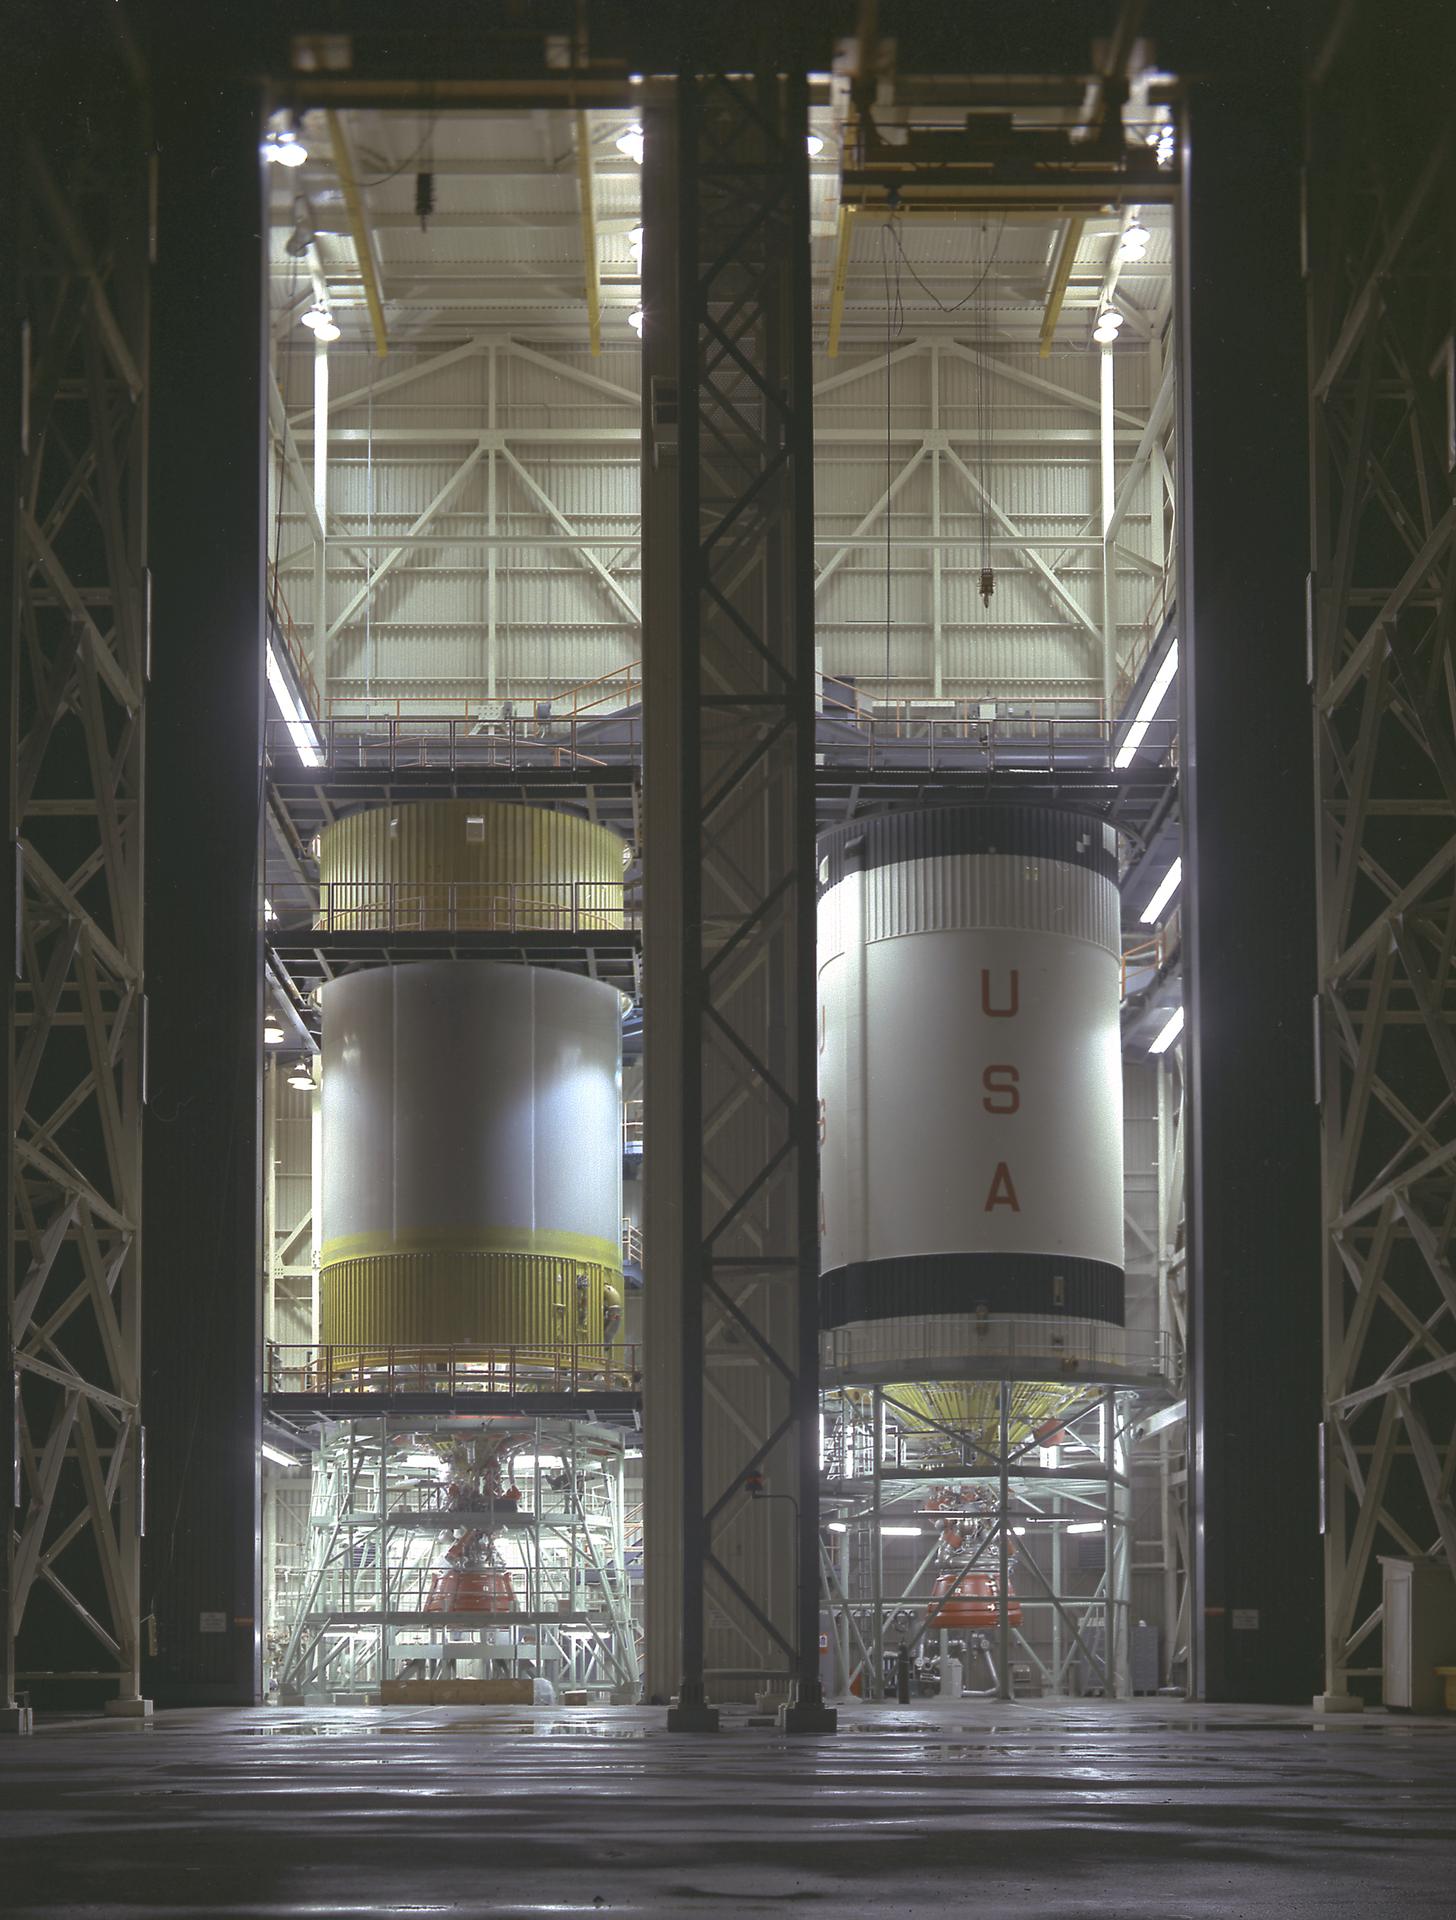 Two S-IVB stages undergoing checkout at Huntington Beach. (Source: NASA)